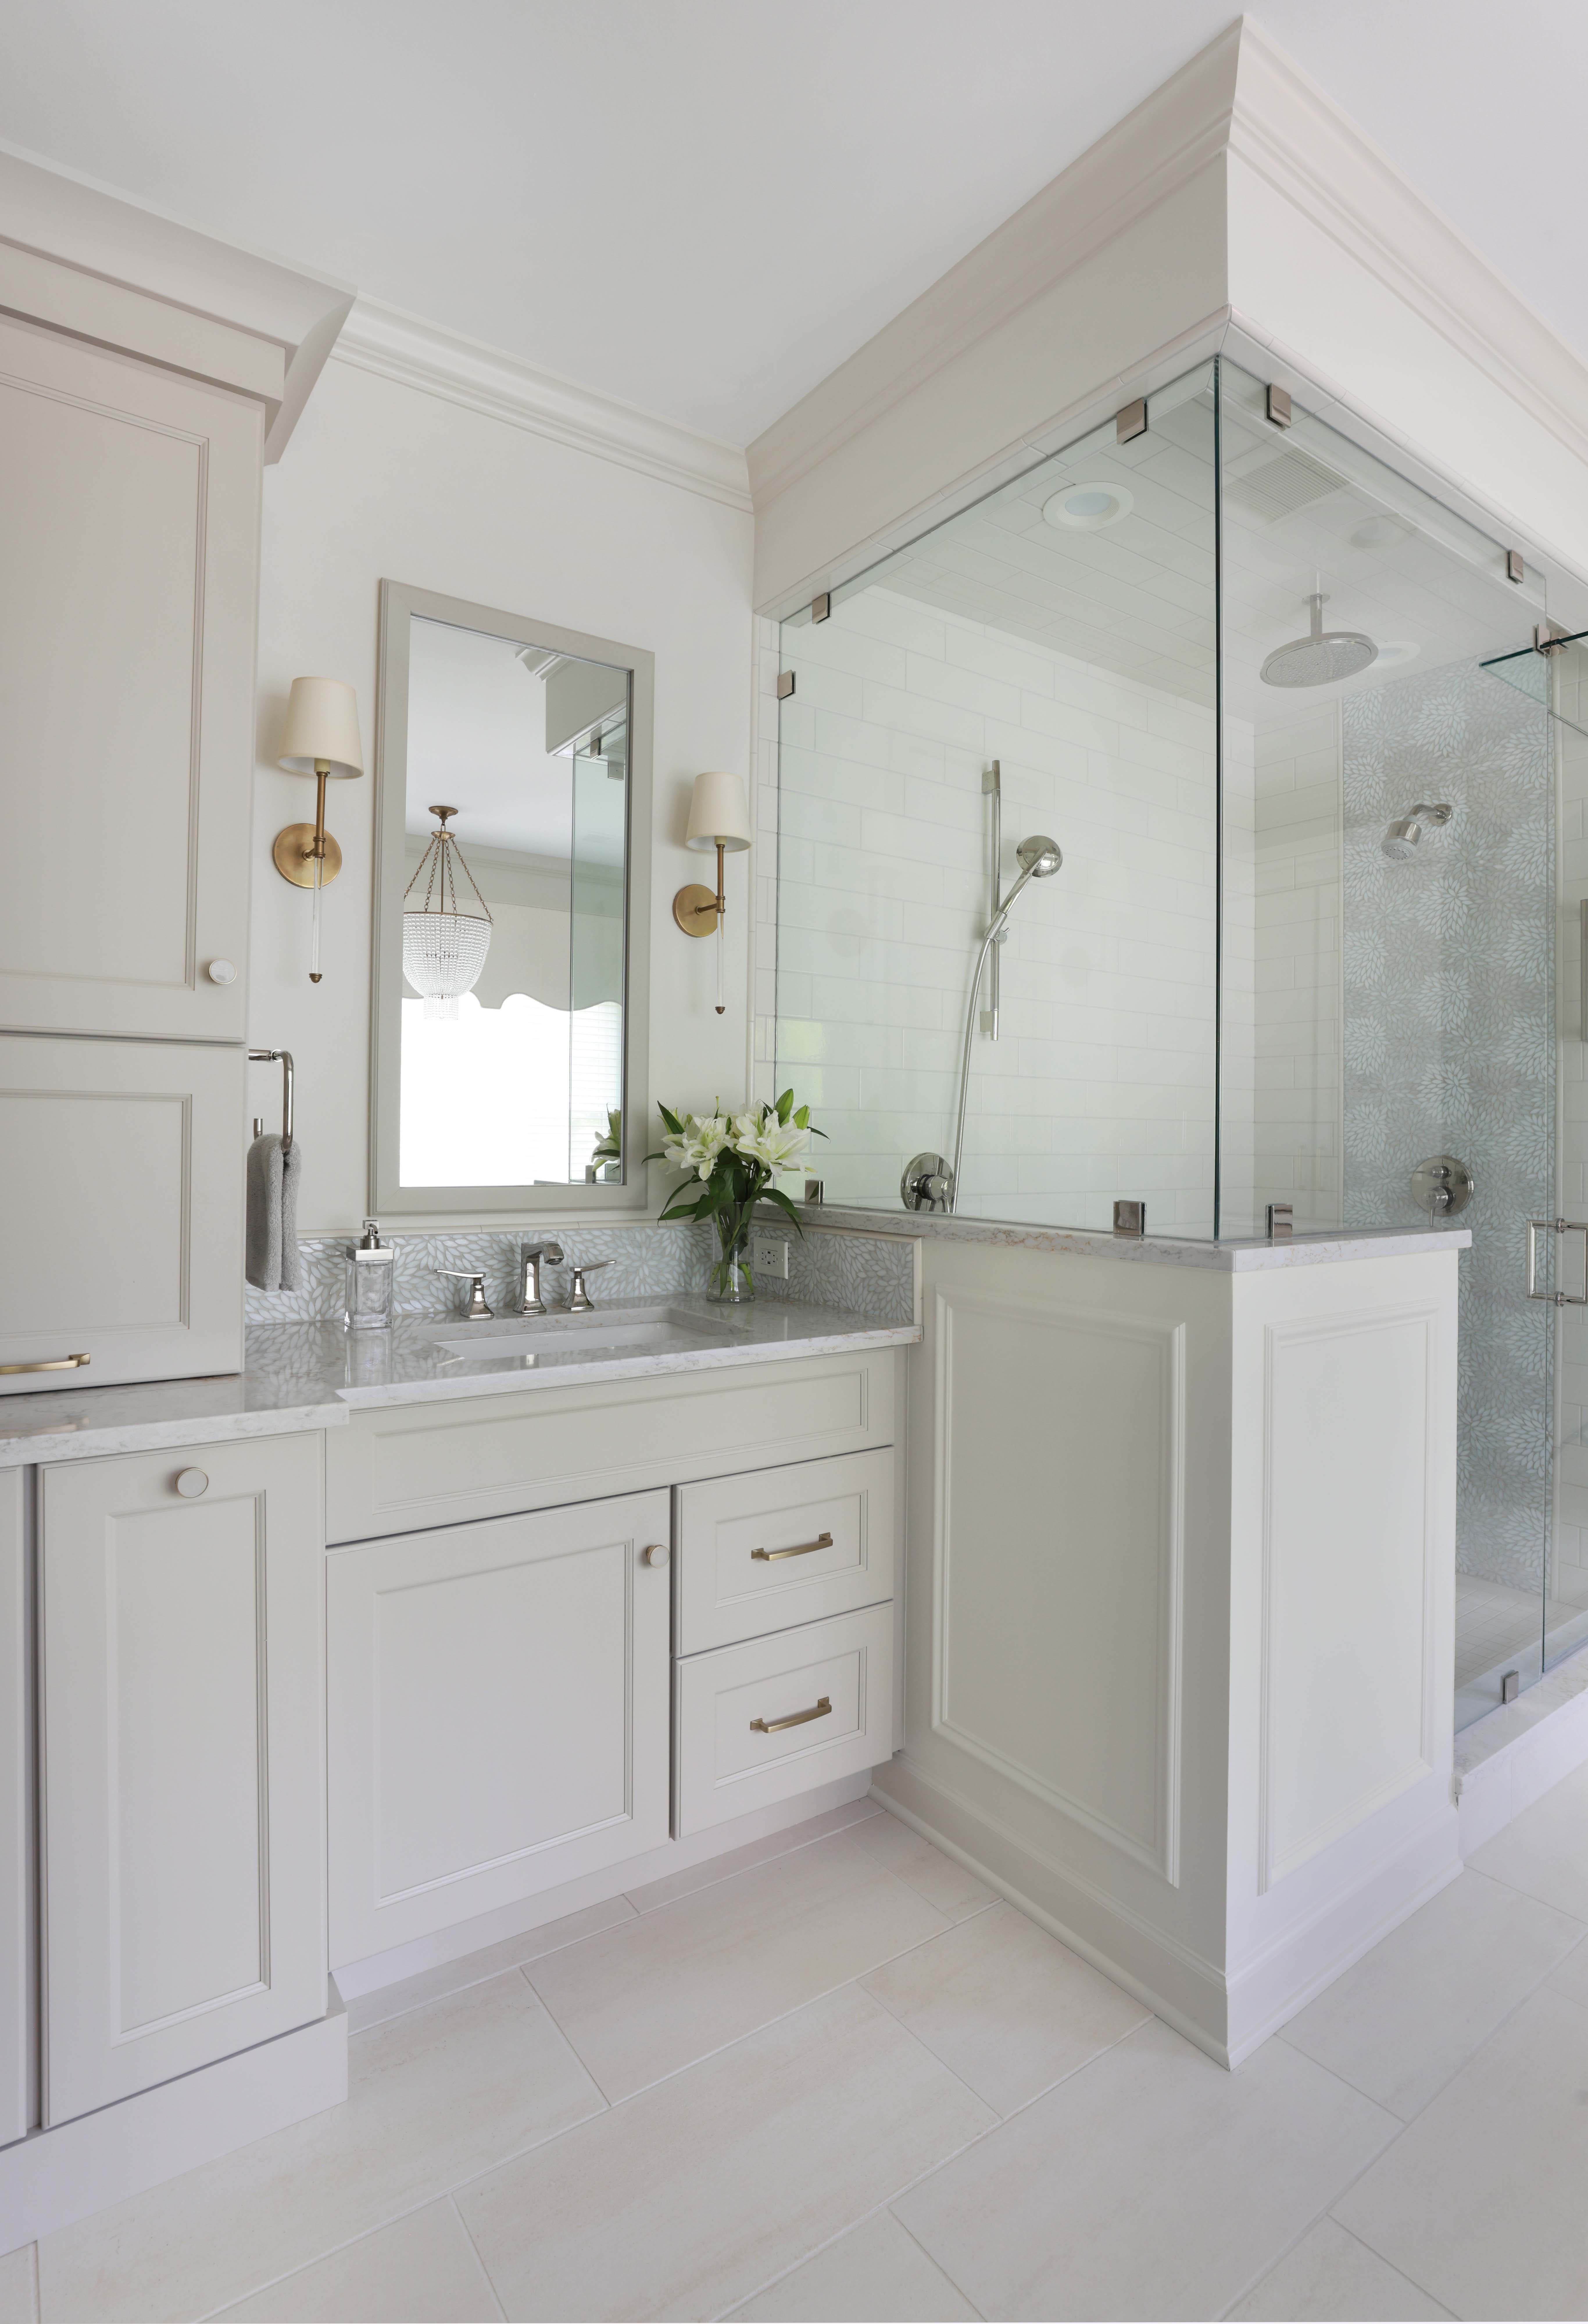 traditional bathroom in light gray with separate vanities and separate bathtub and shower